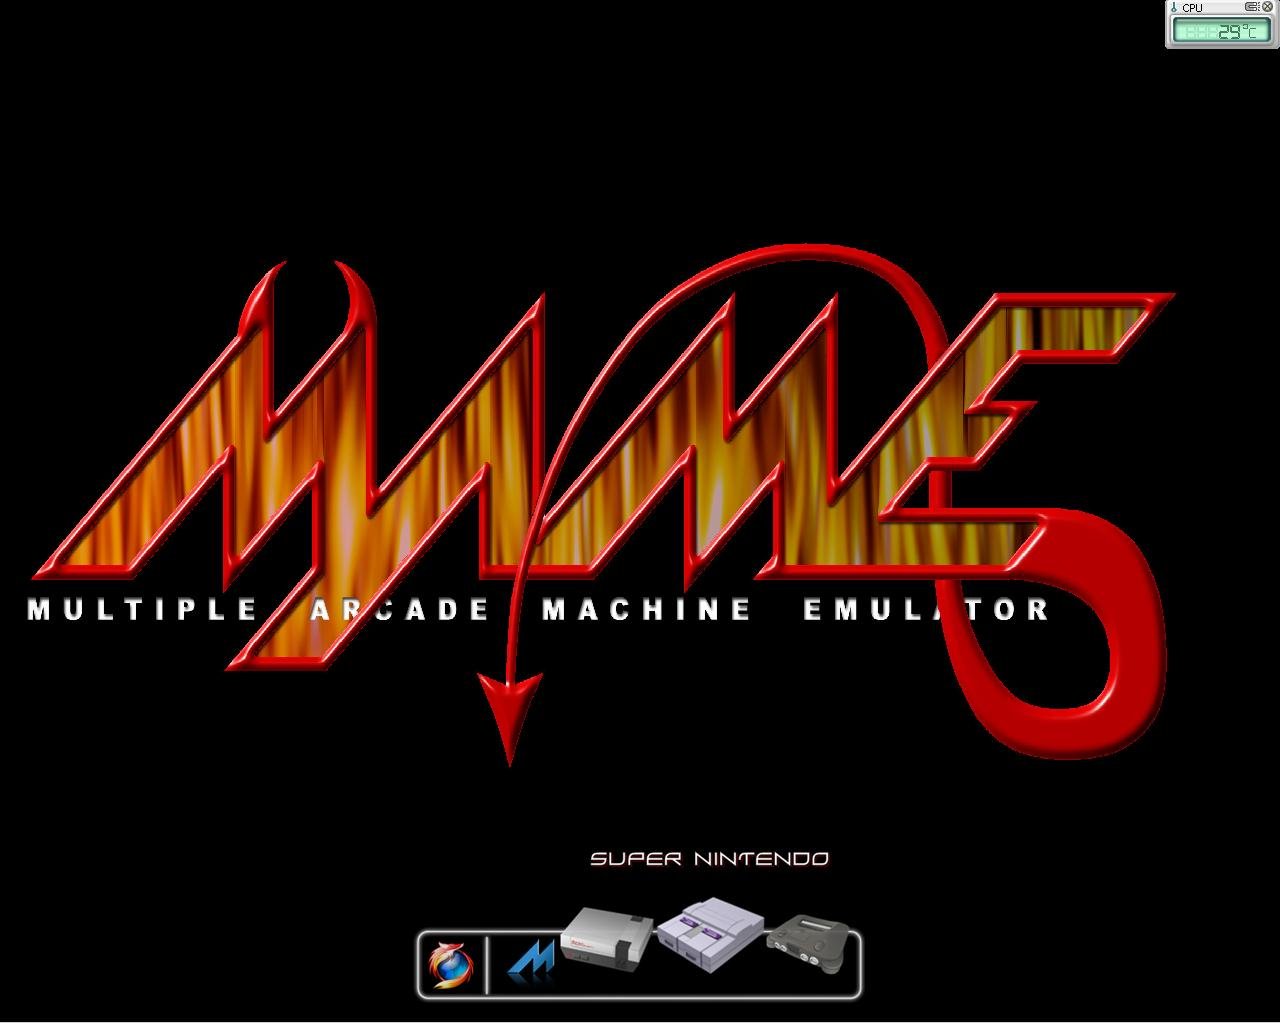 look nice the mame background will be replaced probably with one of my 1280x1024